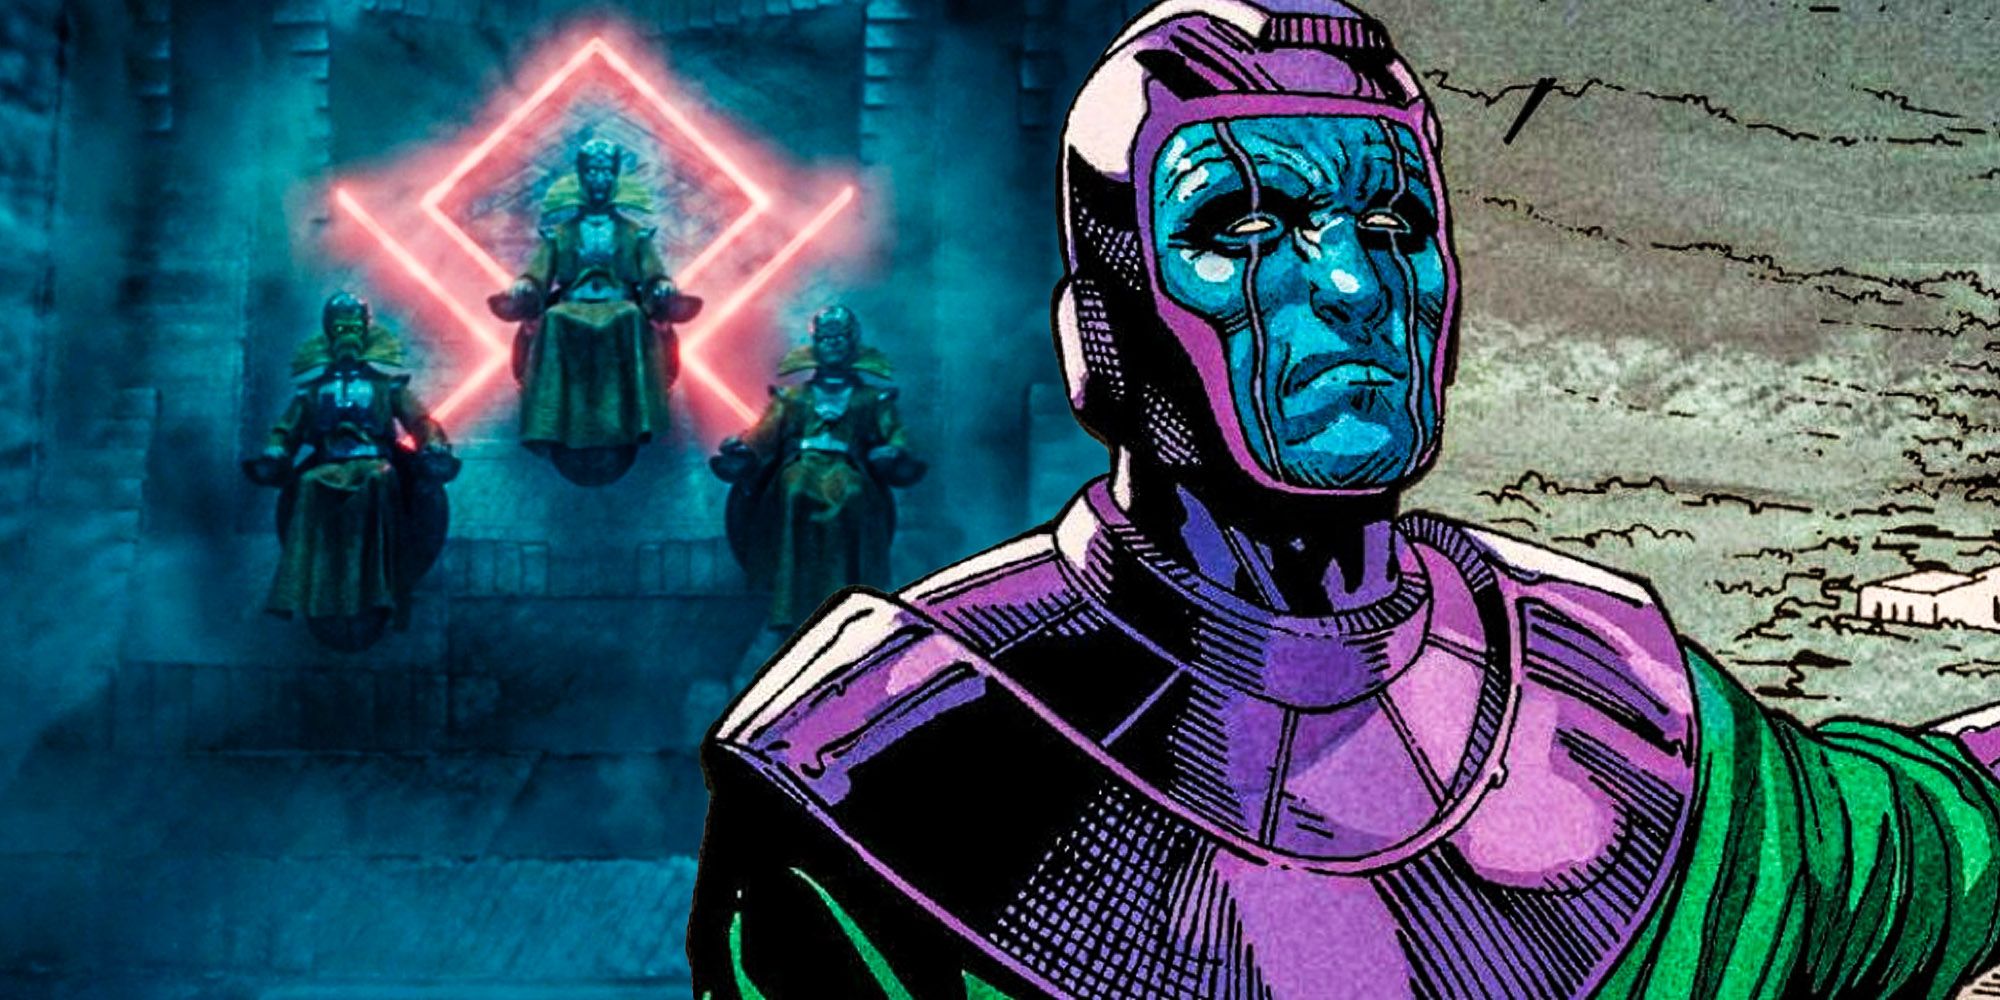 Kang the conqueror is behind the fake time keepers